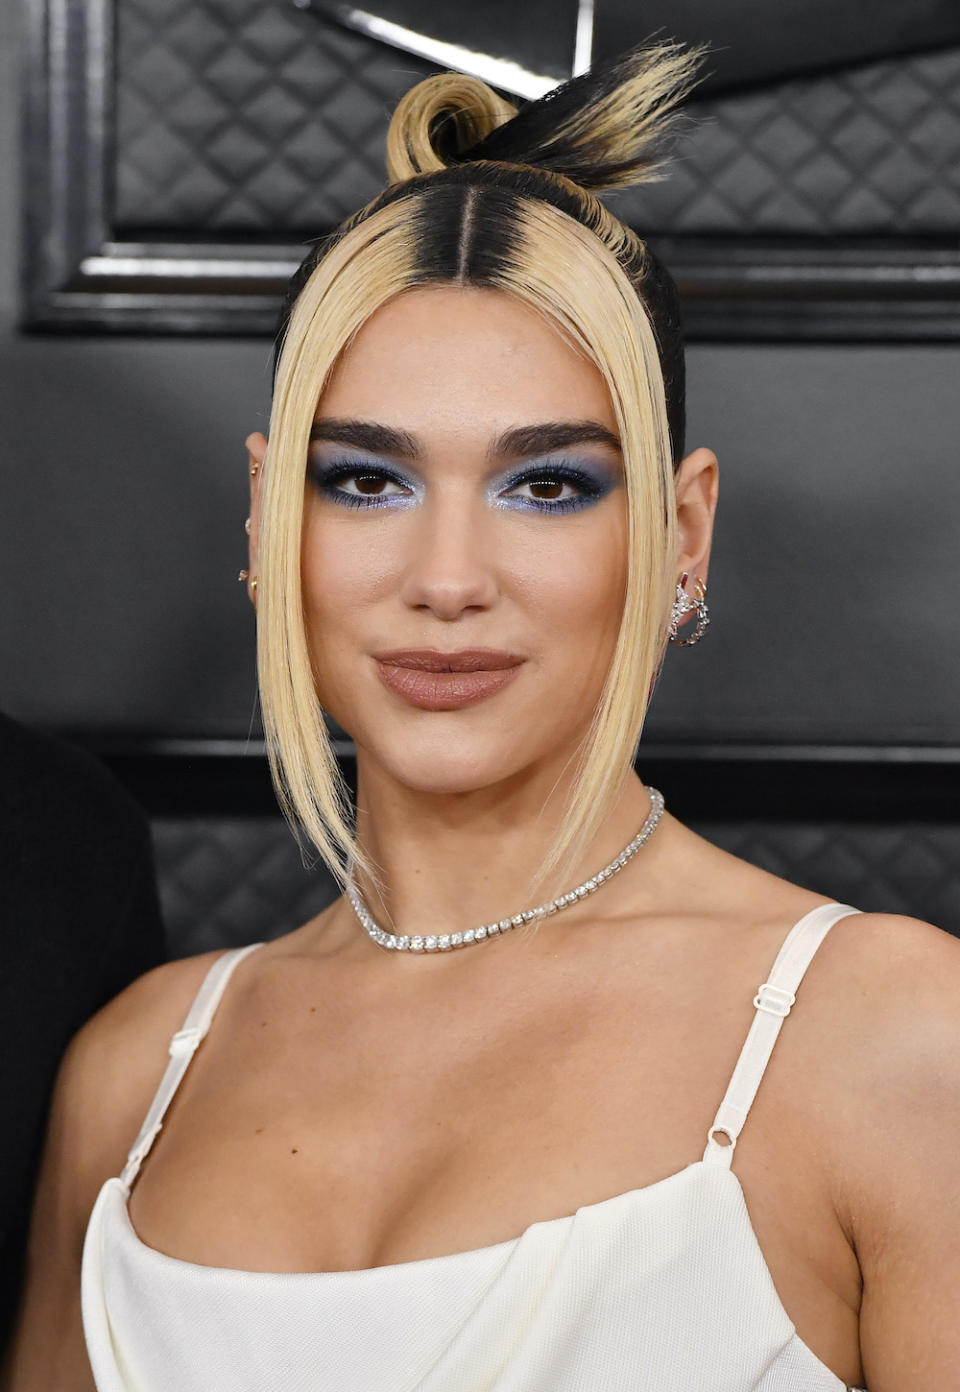 Dua Lipa attends the 62nd Annual GRAMMY Awards at STAPLES Center on January 26, 2020 in Los Angeles, California